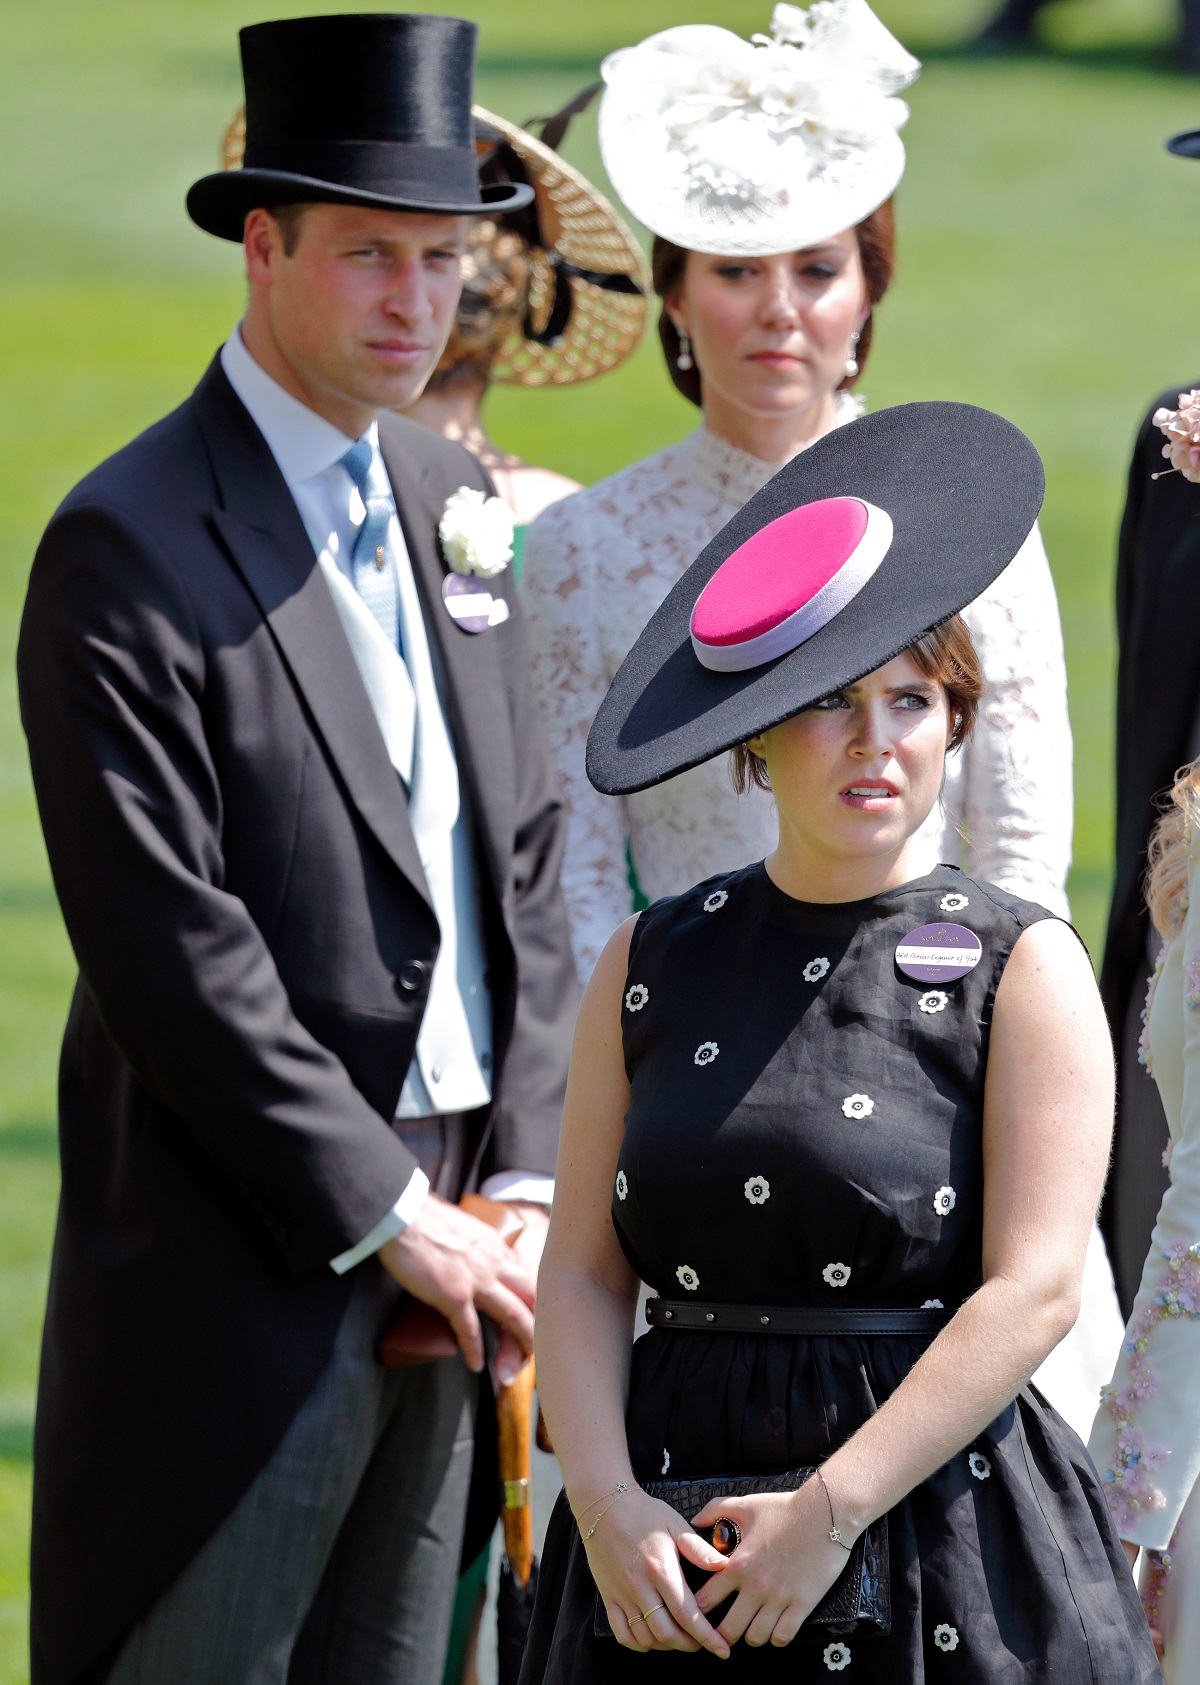 Prince William, Kate Middleton, and Princess Eugenie attend day 1 of Royal Ascot